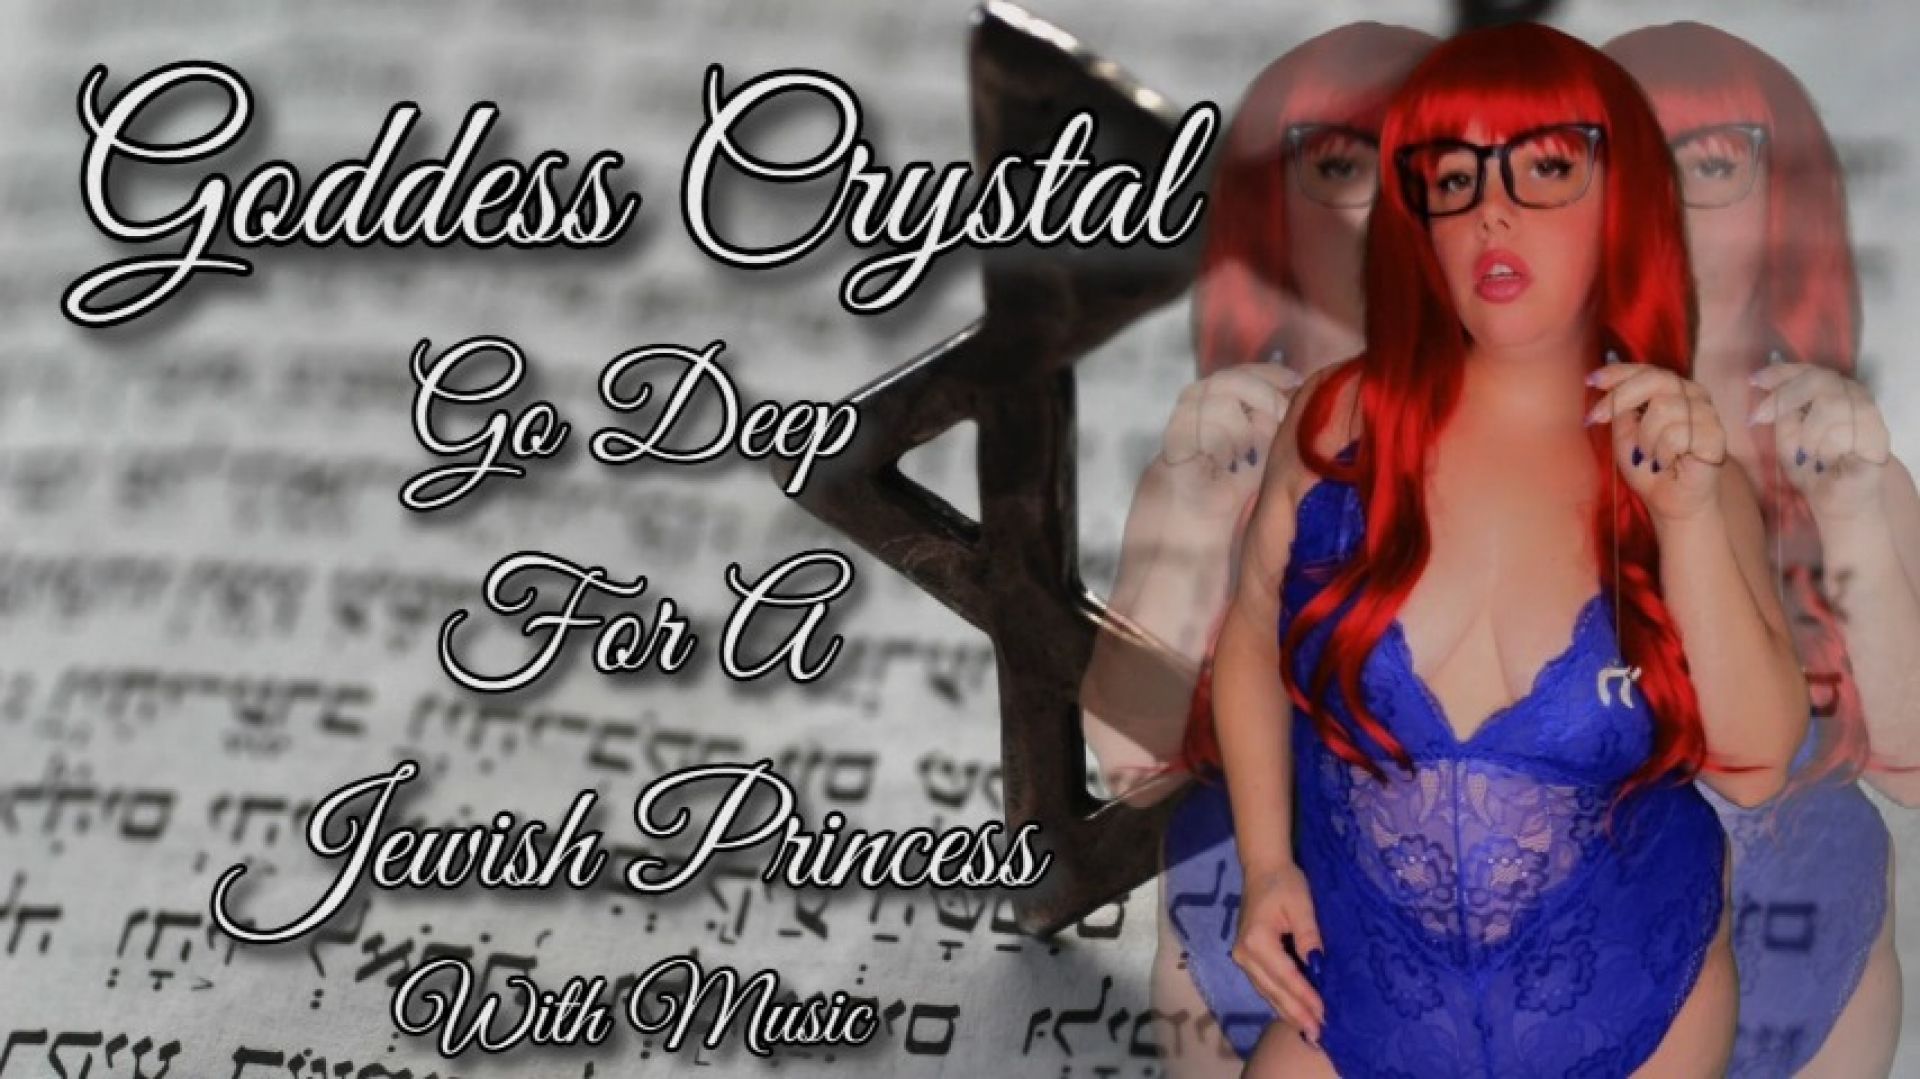 Go Deep For A Jewish Princess With Music